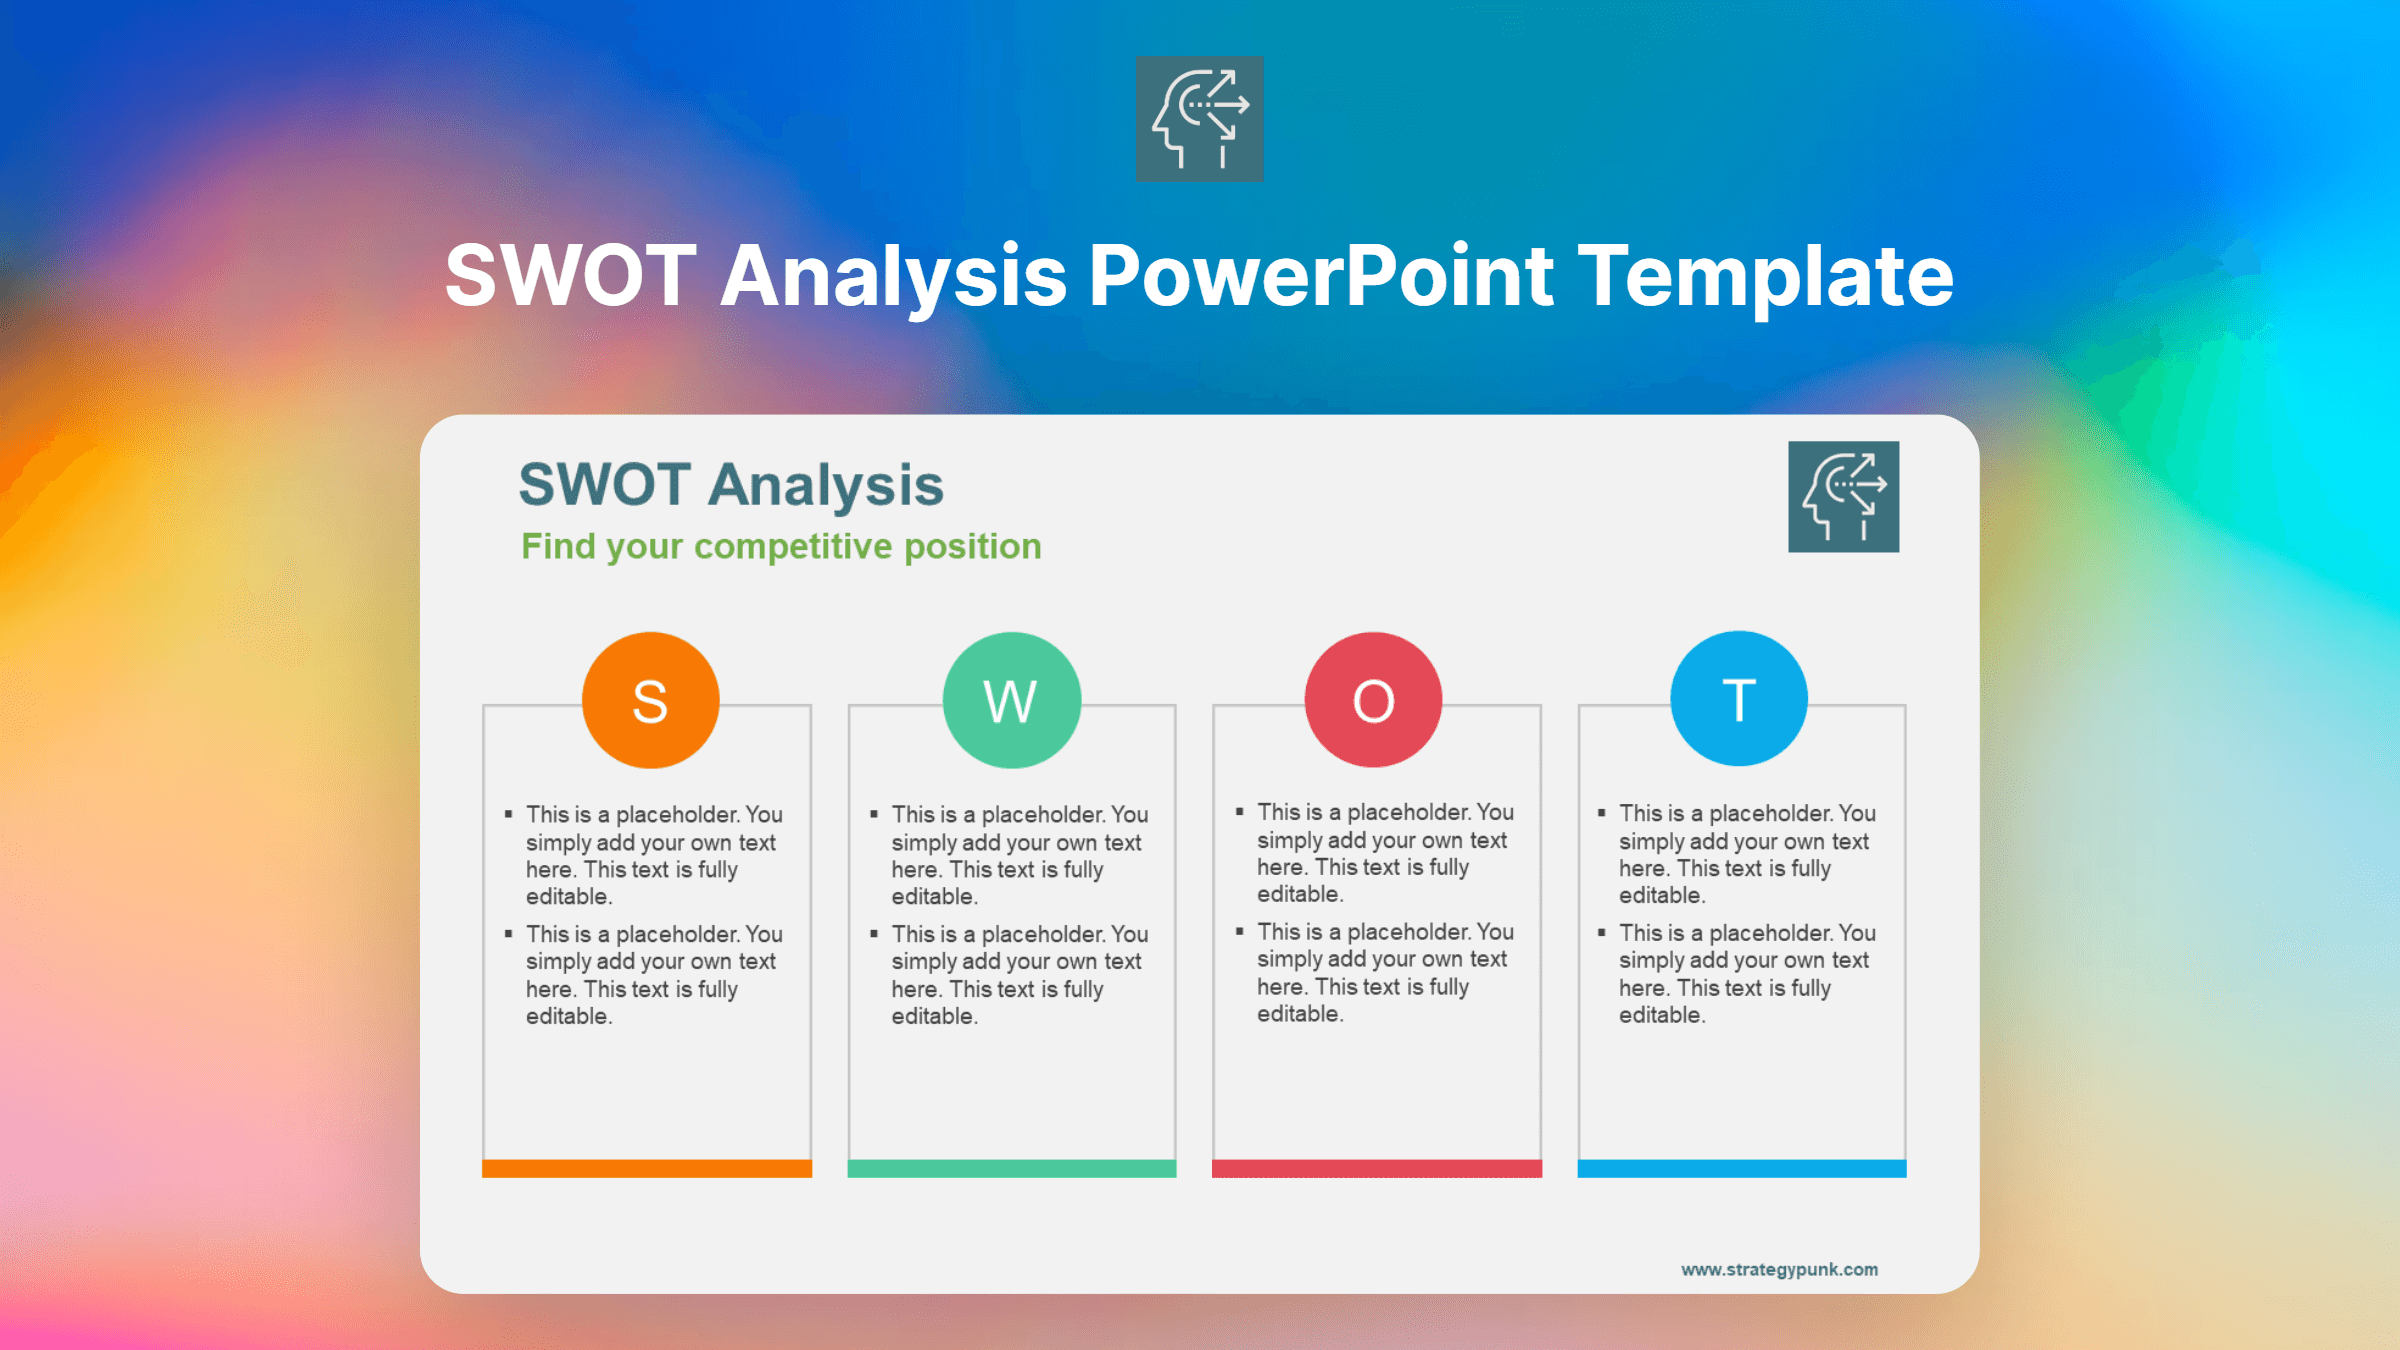 Unleash Your Potential with the Best SWOT Analysis PowerPoint Template